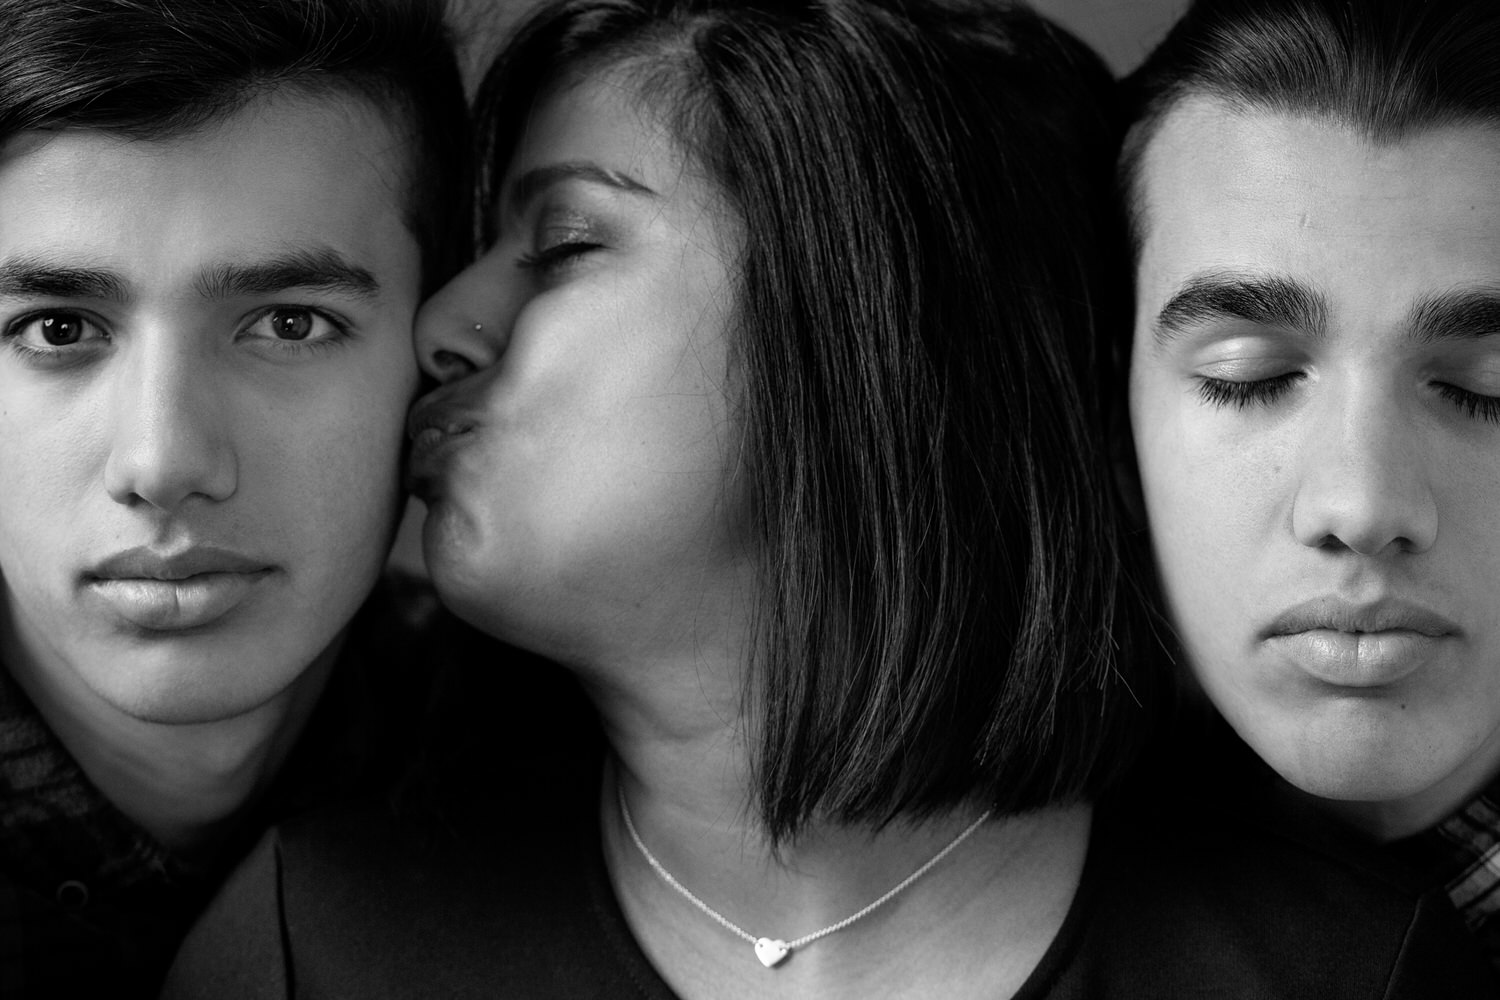 mom and her two boys get close during their studio photography session